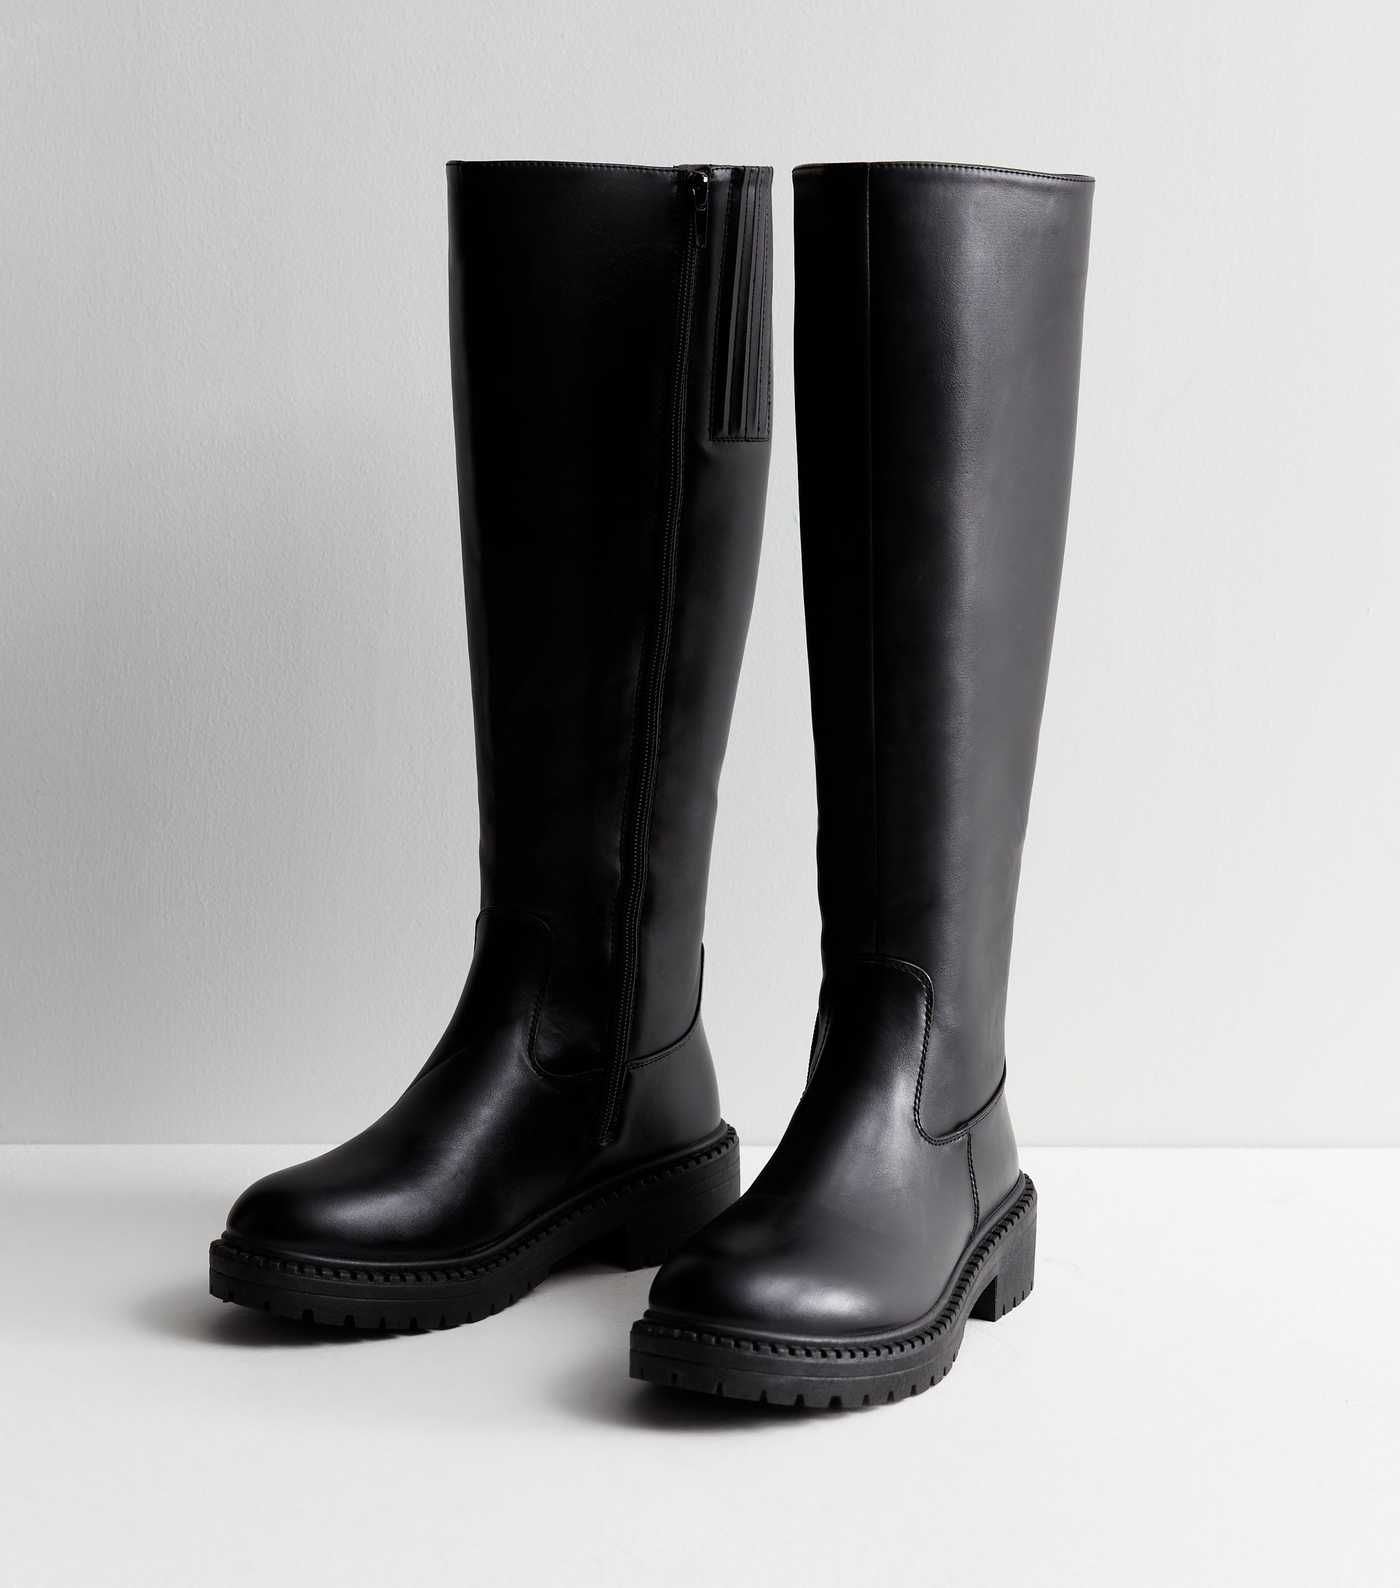 Extra Calf Fit Black Leather-Look Chunky Knee High Boots
						
						Add to Saved Items
						Re... | New Look (UK)